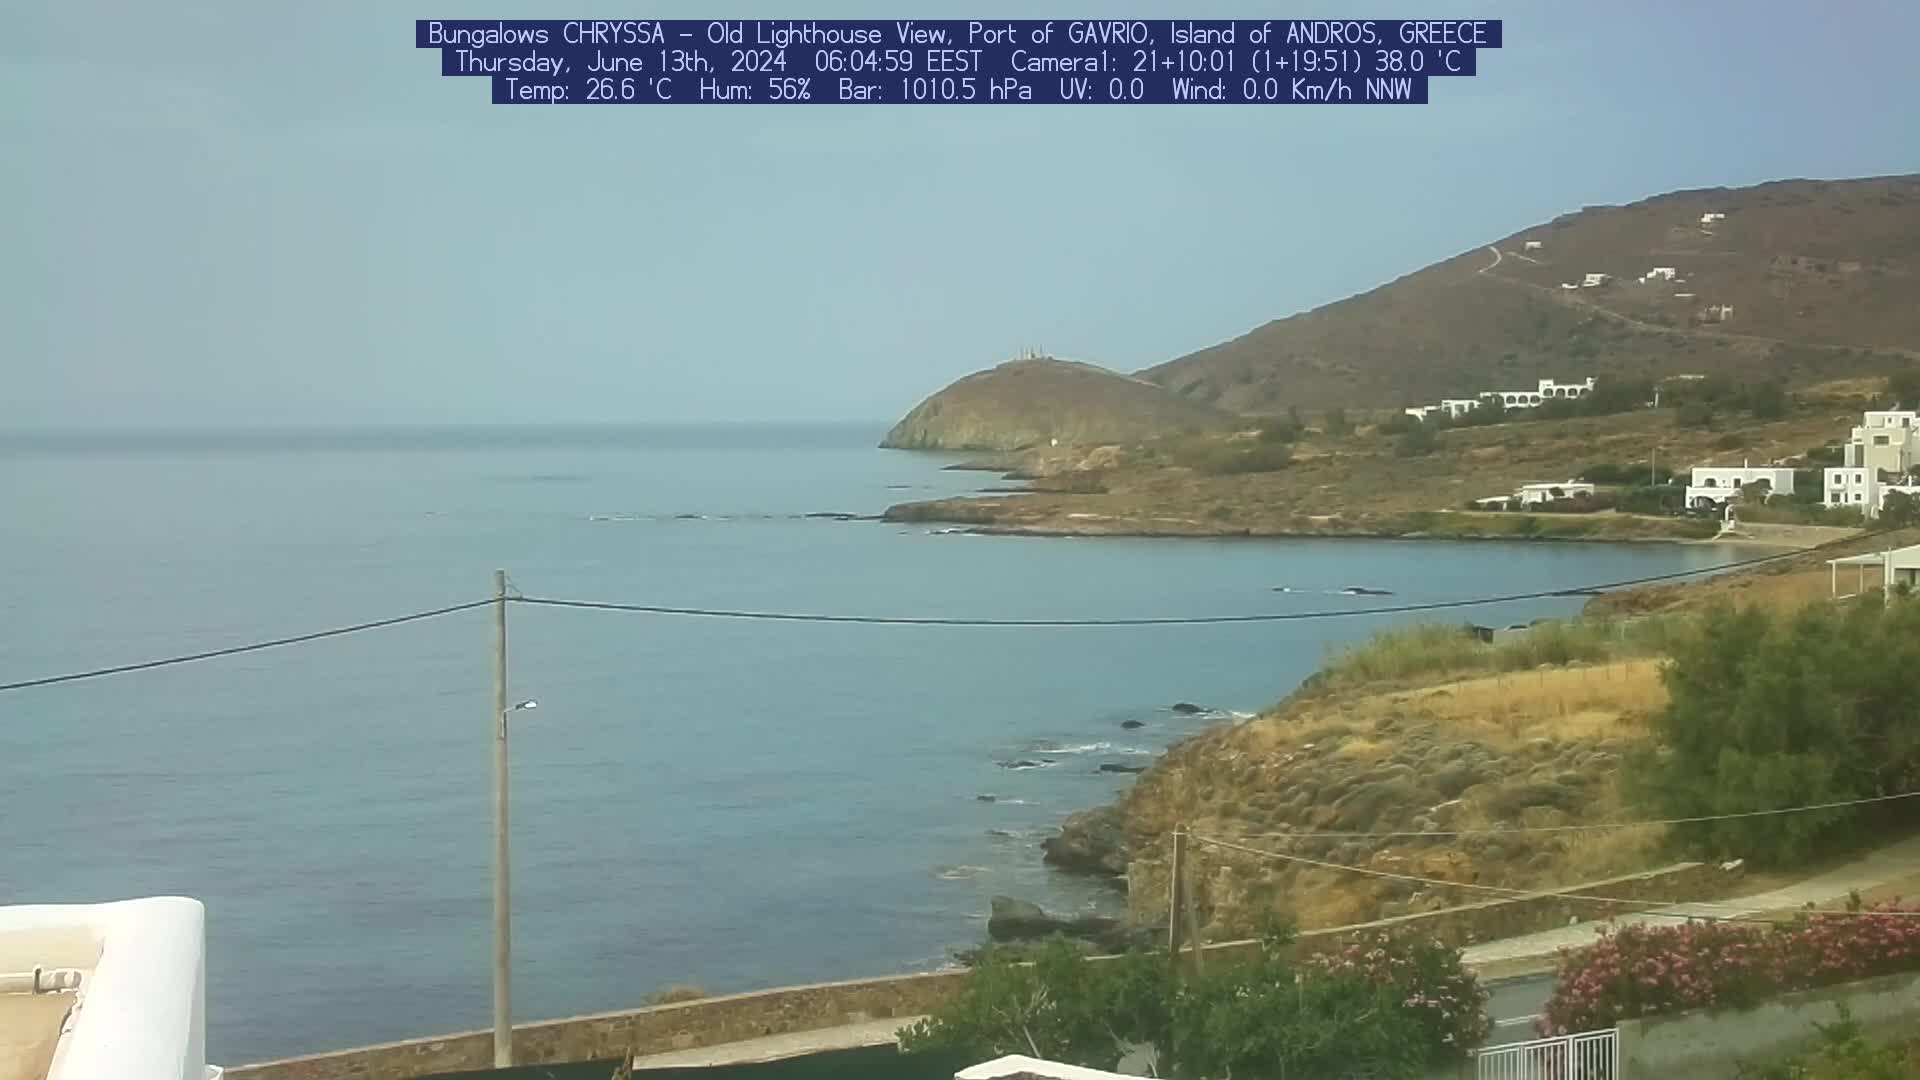 Andros - Gavrion Mar. 06:05